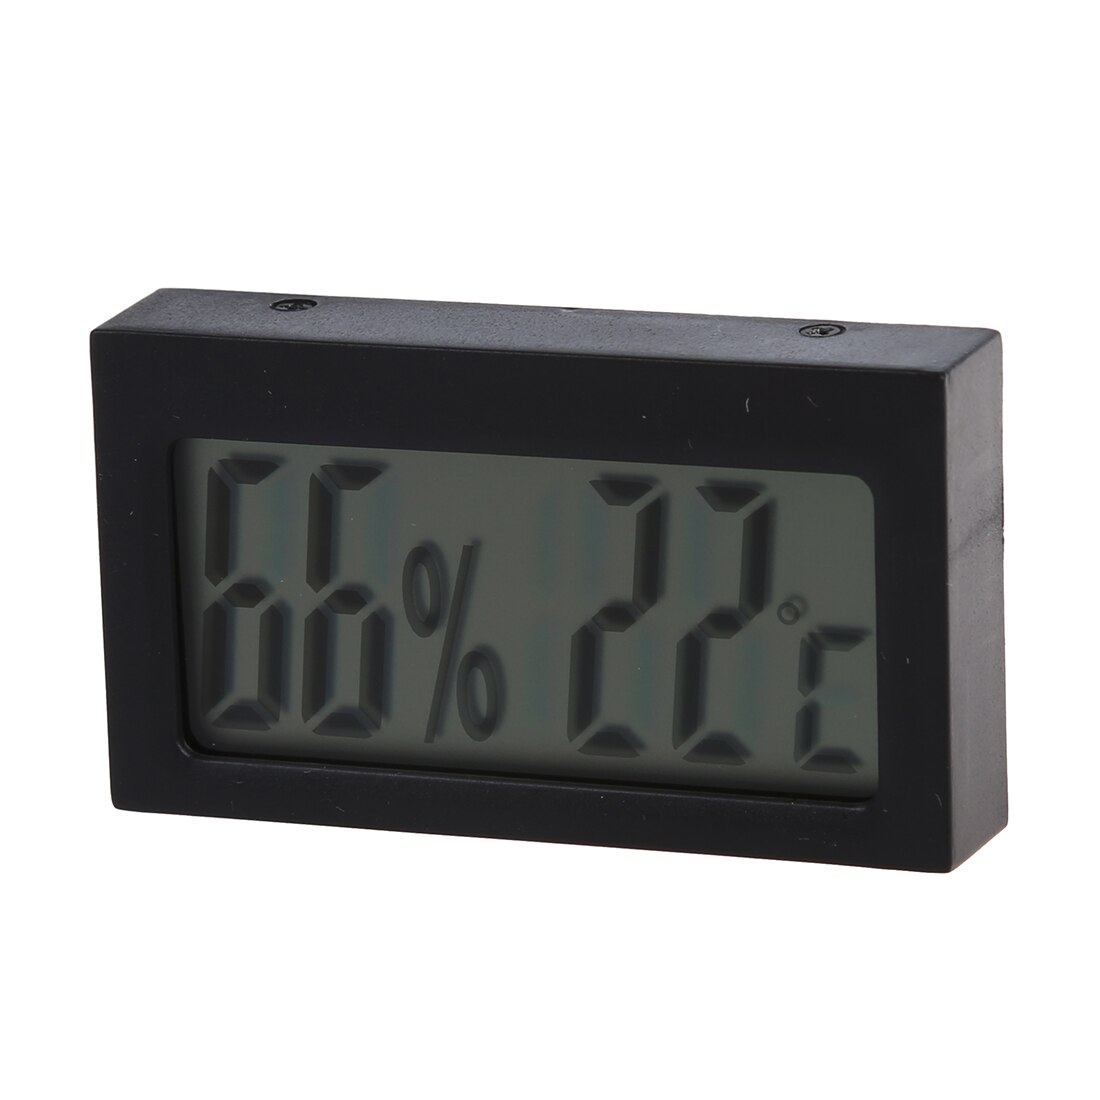 Lcd Thermometer Hygrometer Weerstation